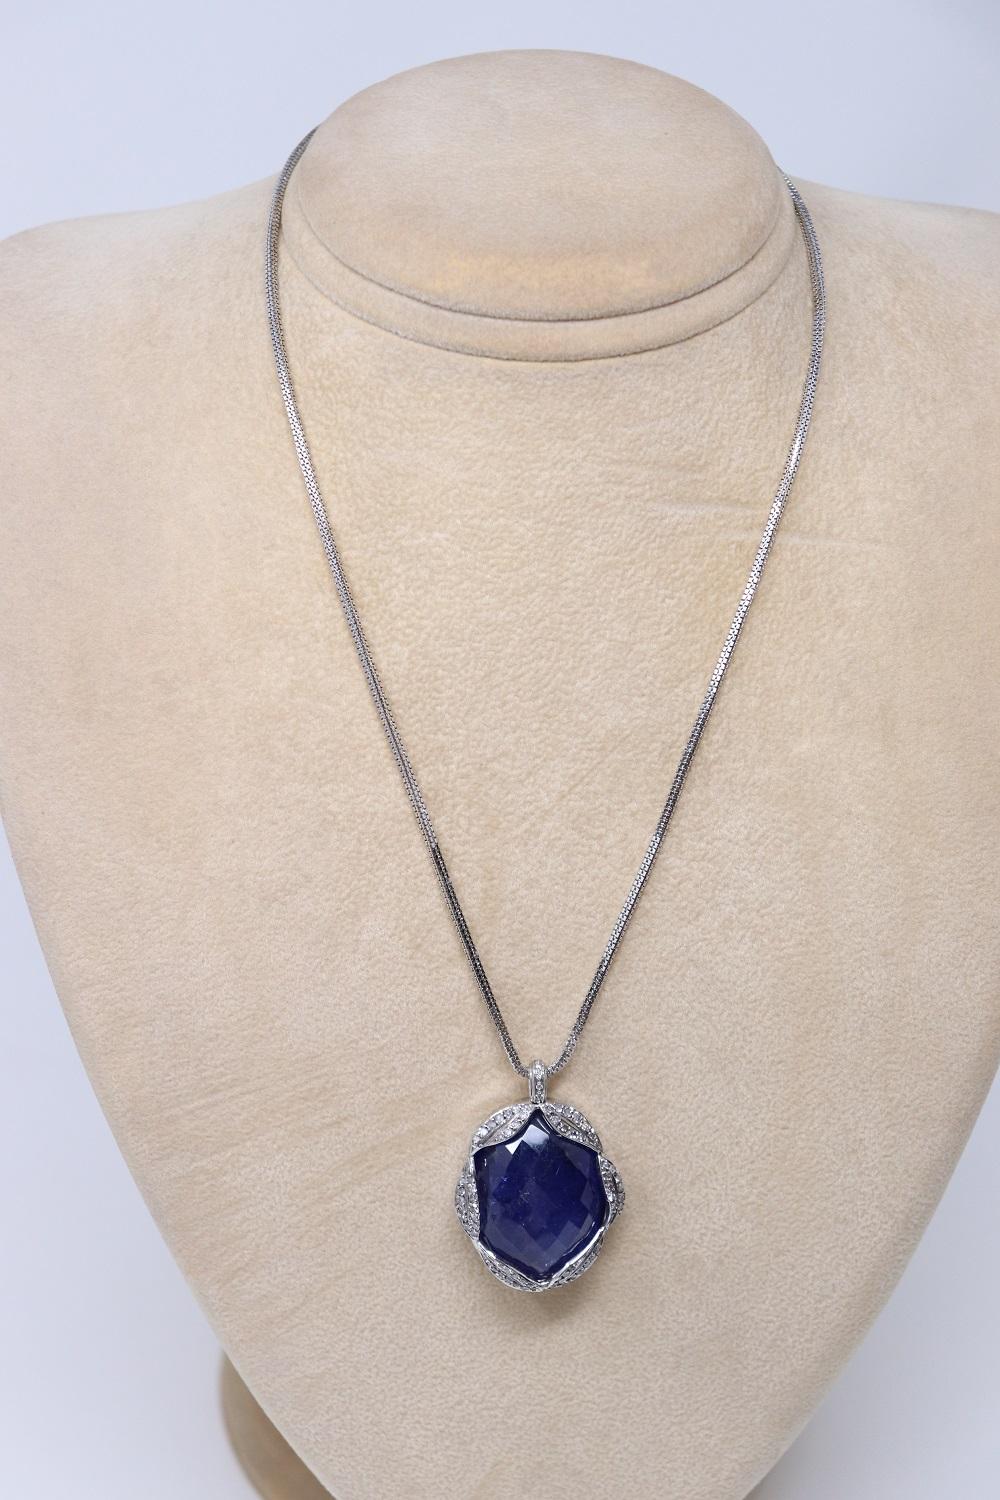 65 Ct Tanzanite and Diamond Pendant Necklace in 18 Kt White Gold For Sale 1